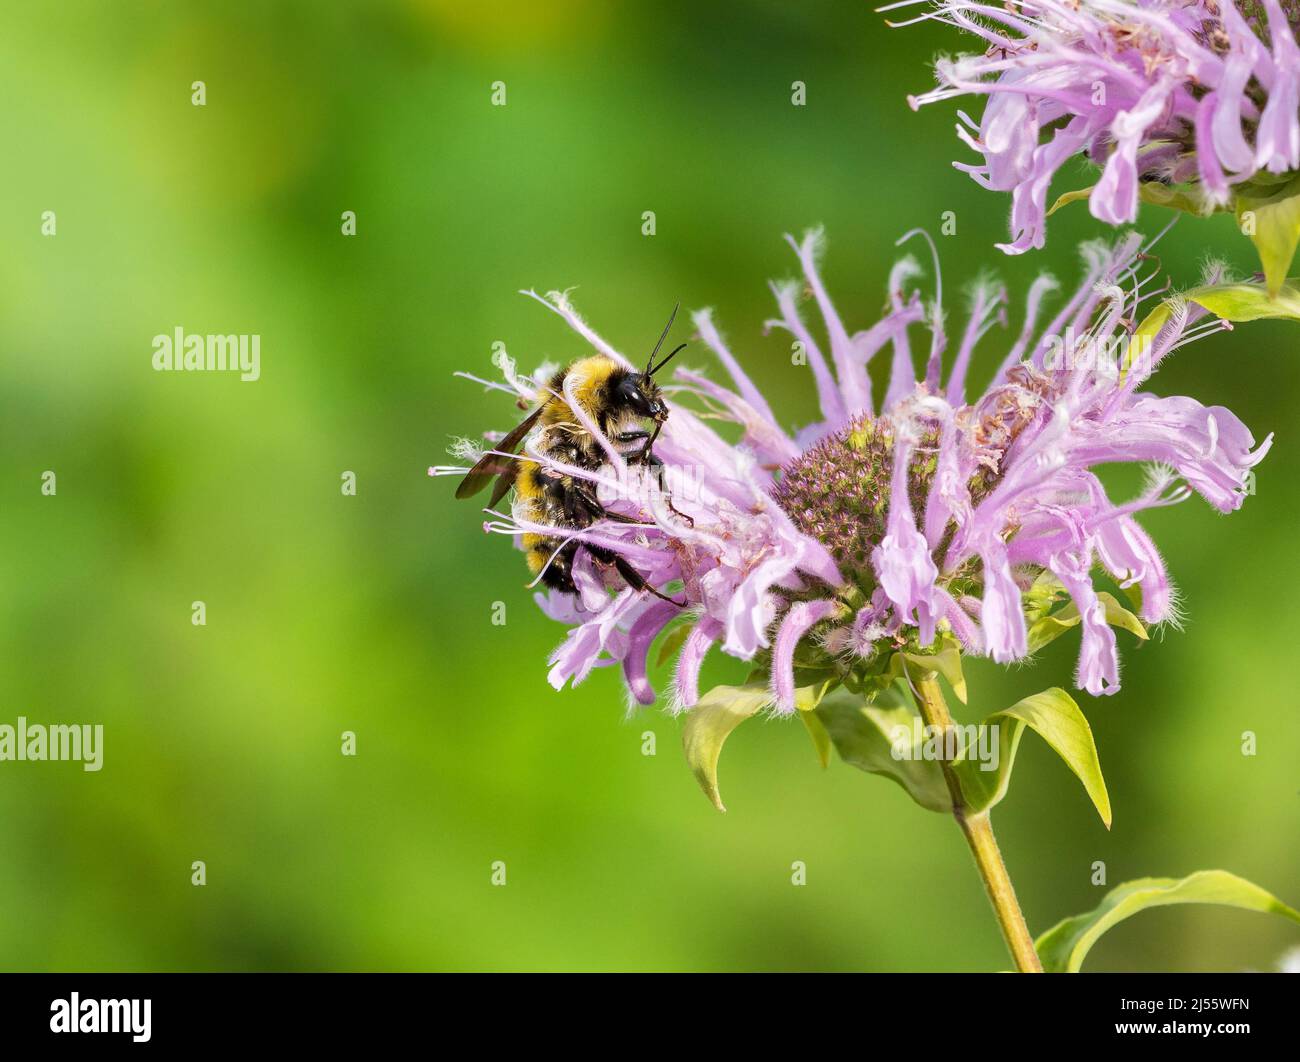 Close up of a Northern Amber Bumble Bee (Bombus borealis) moving through a light purple Bee Balm blossom. Stock Photo